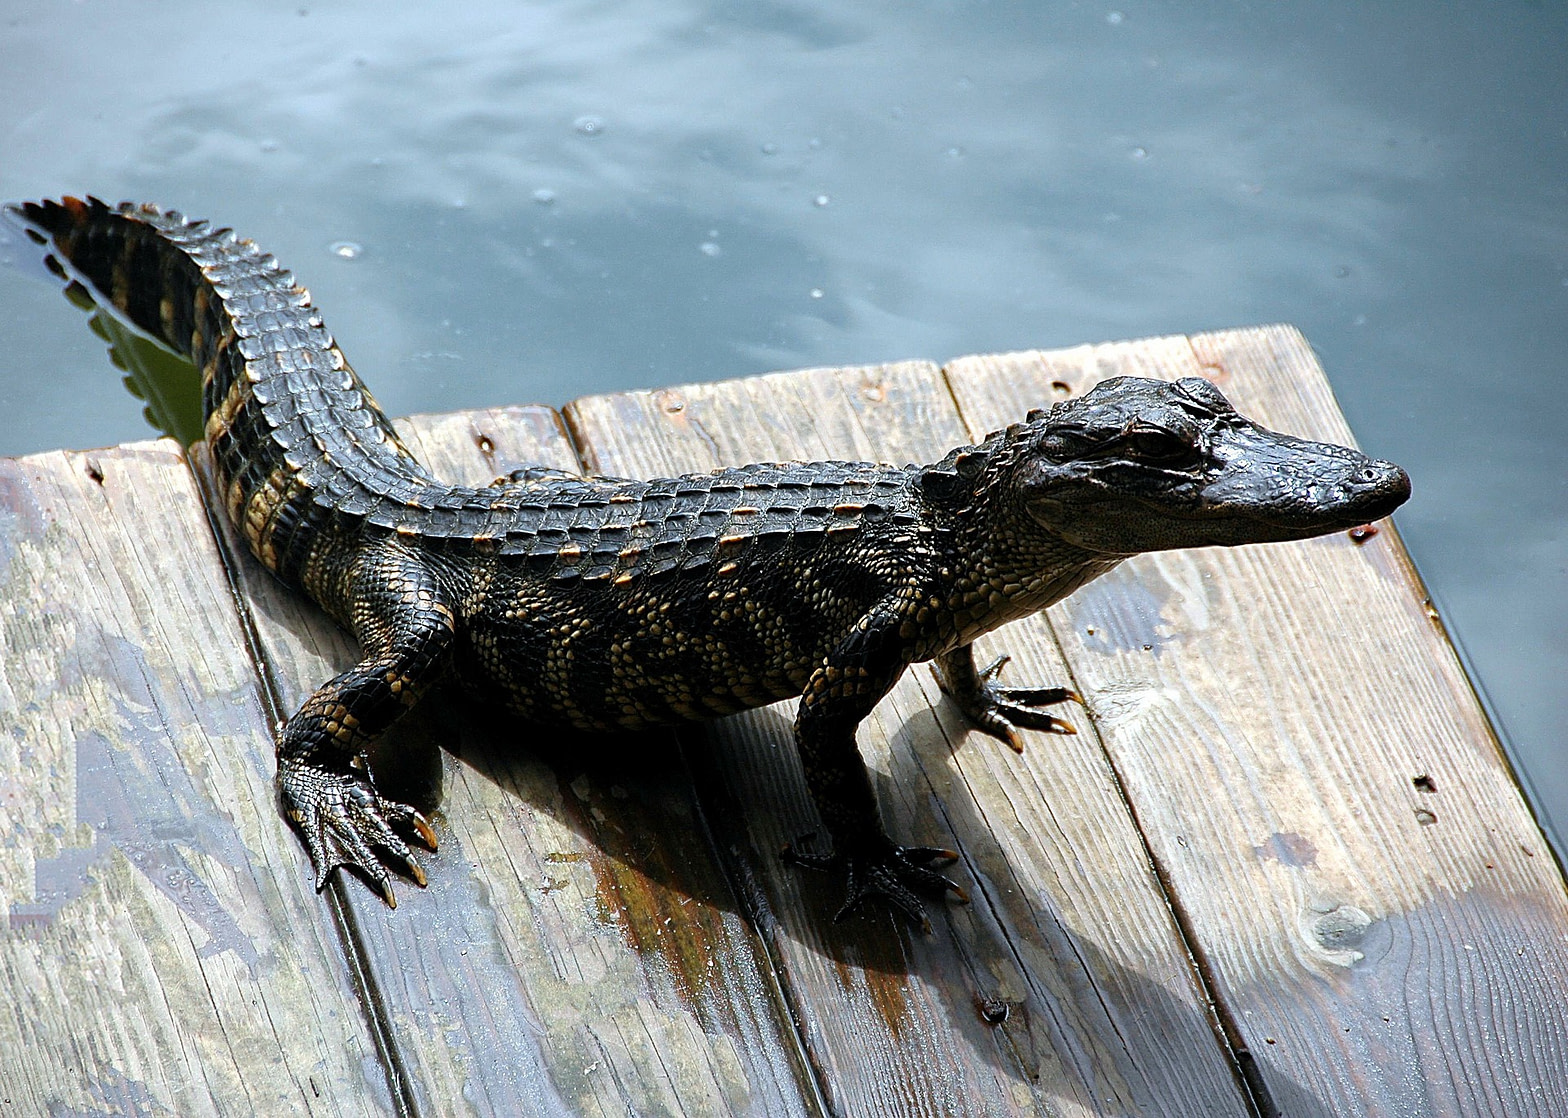 A young alligator on a dock.